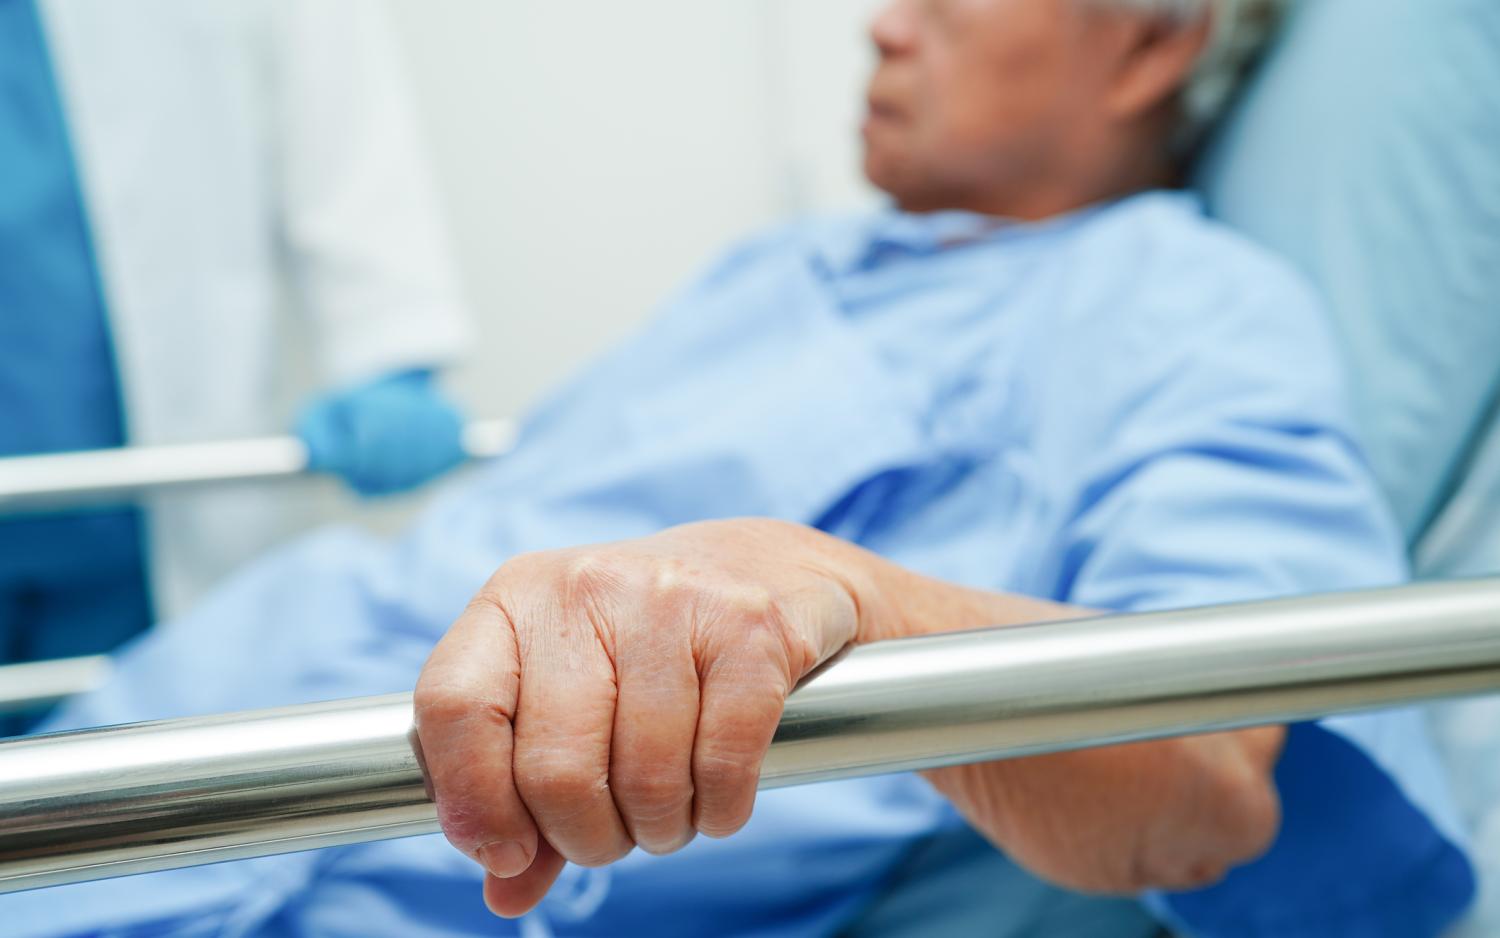 Hospital patient holding bed rail